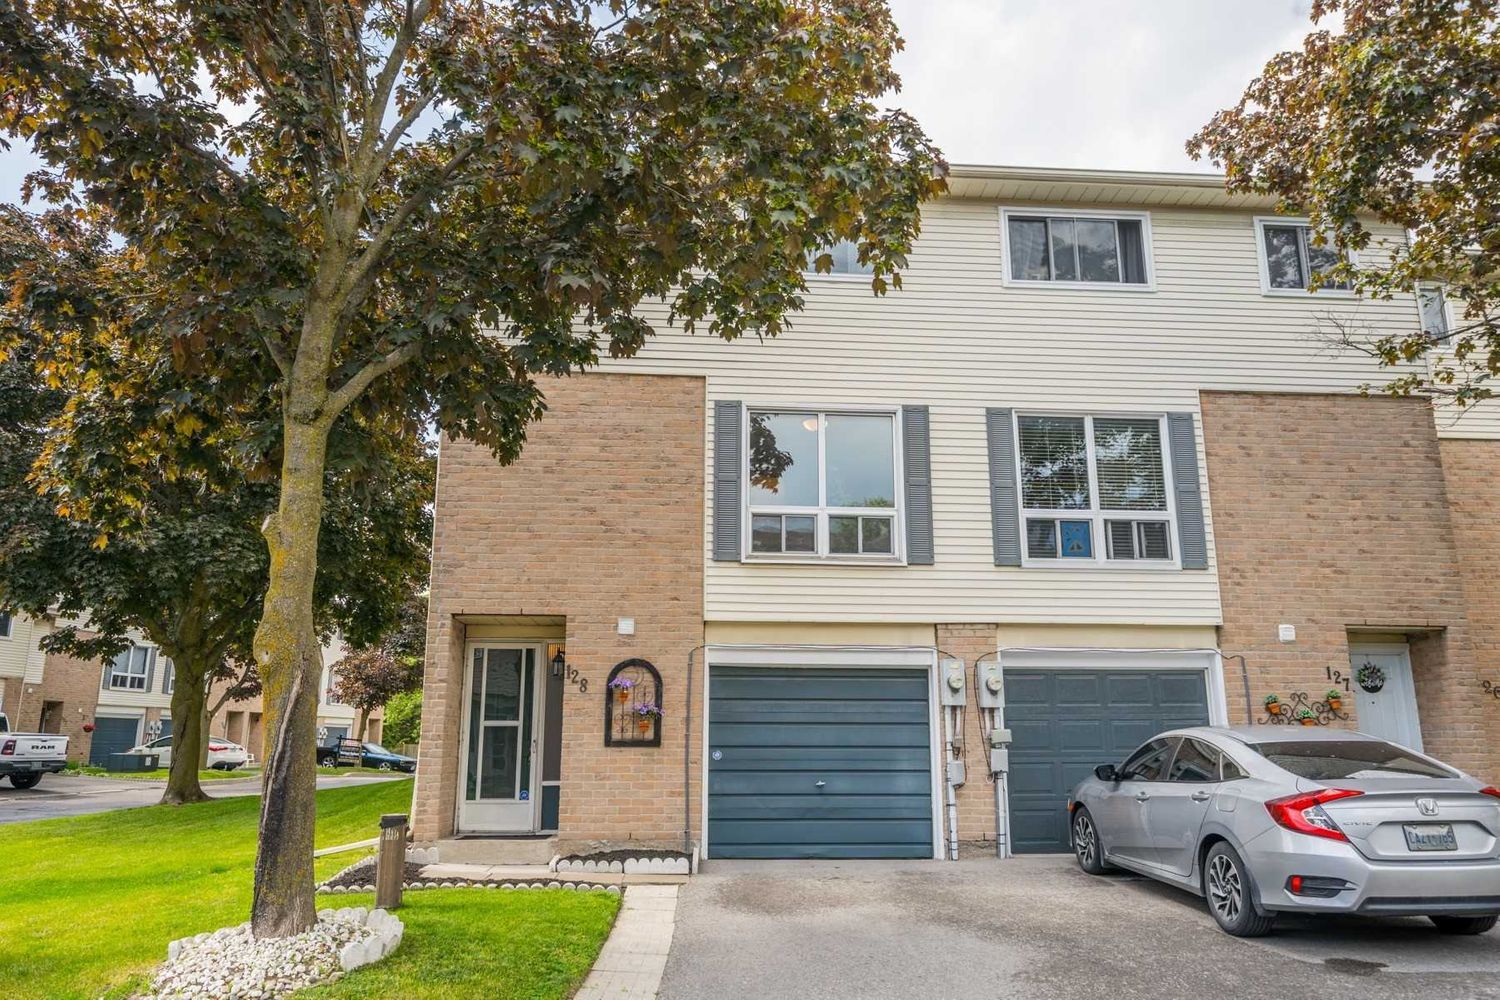 1133 Ritson Road N. Parview Gardens Townhomes is located in  Oshawa, Toronto - image #1 of 2